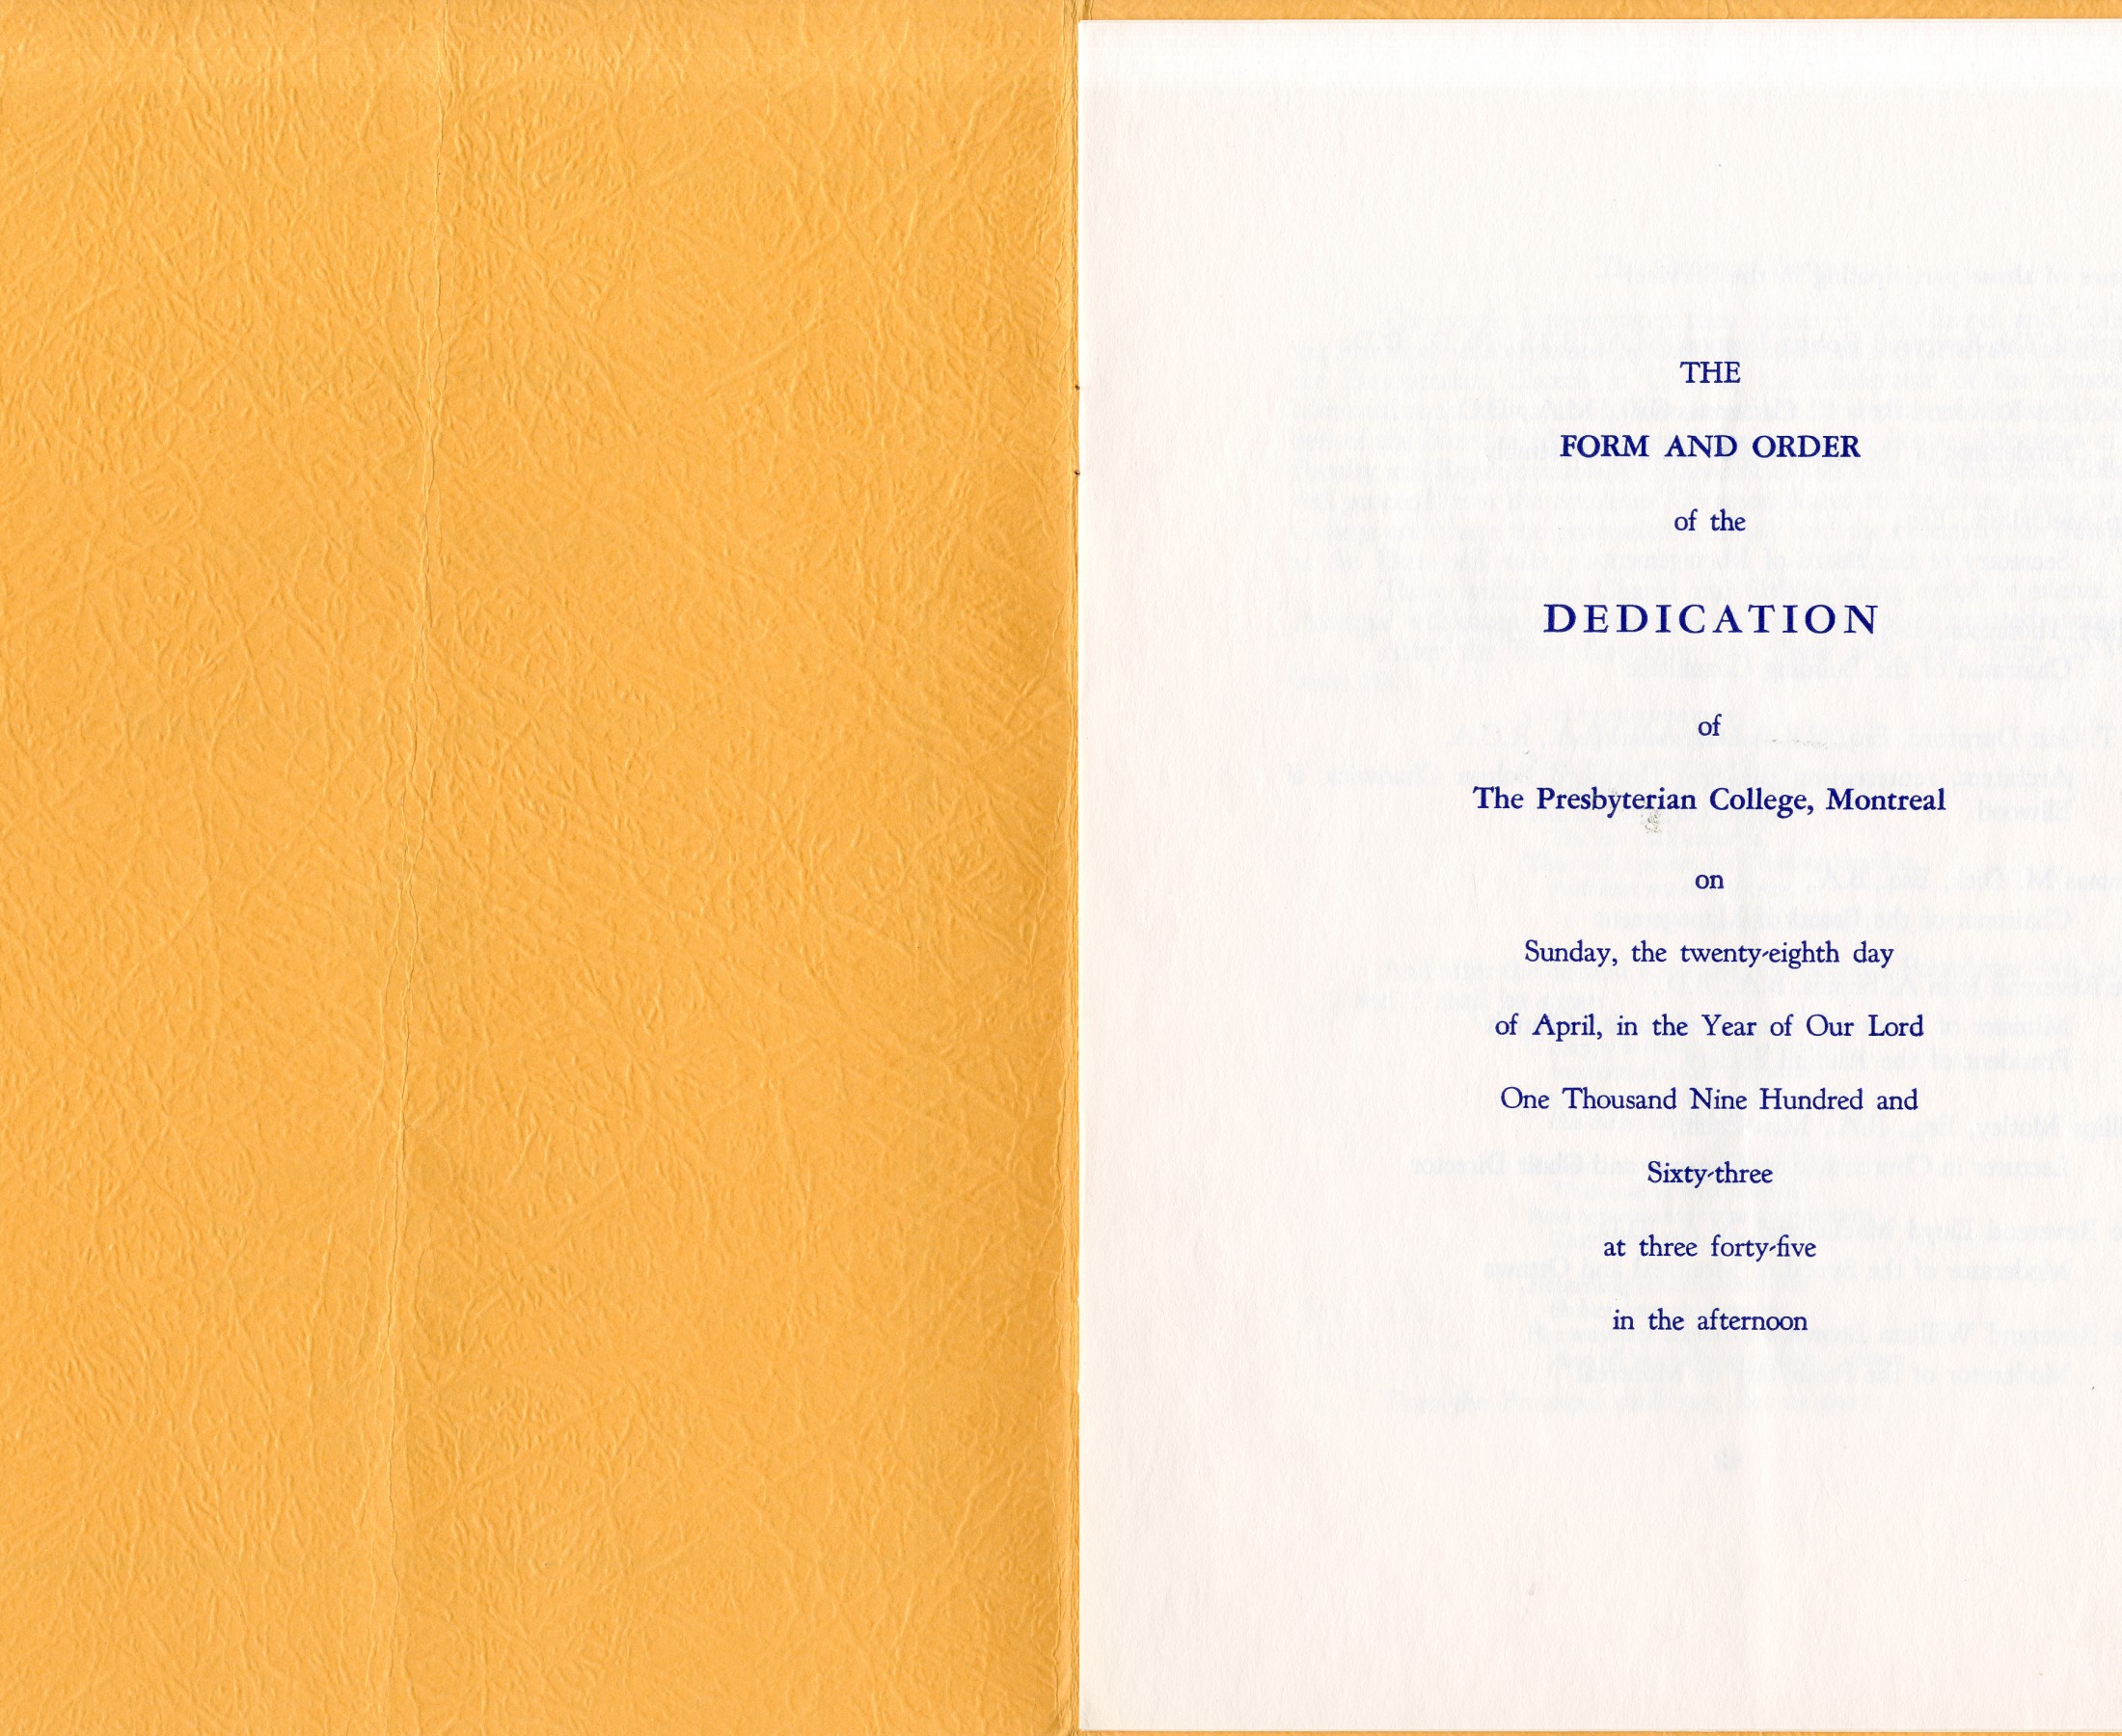 The Program for the dedication of the College